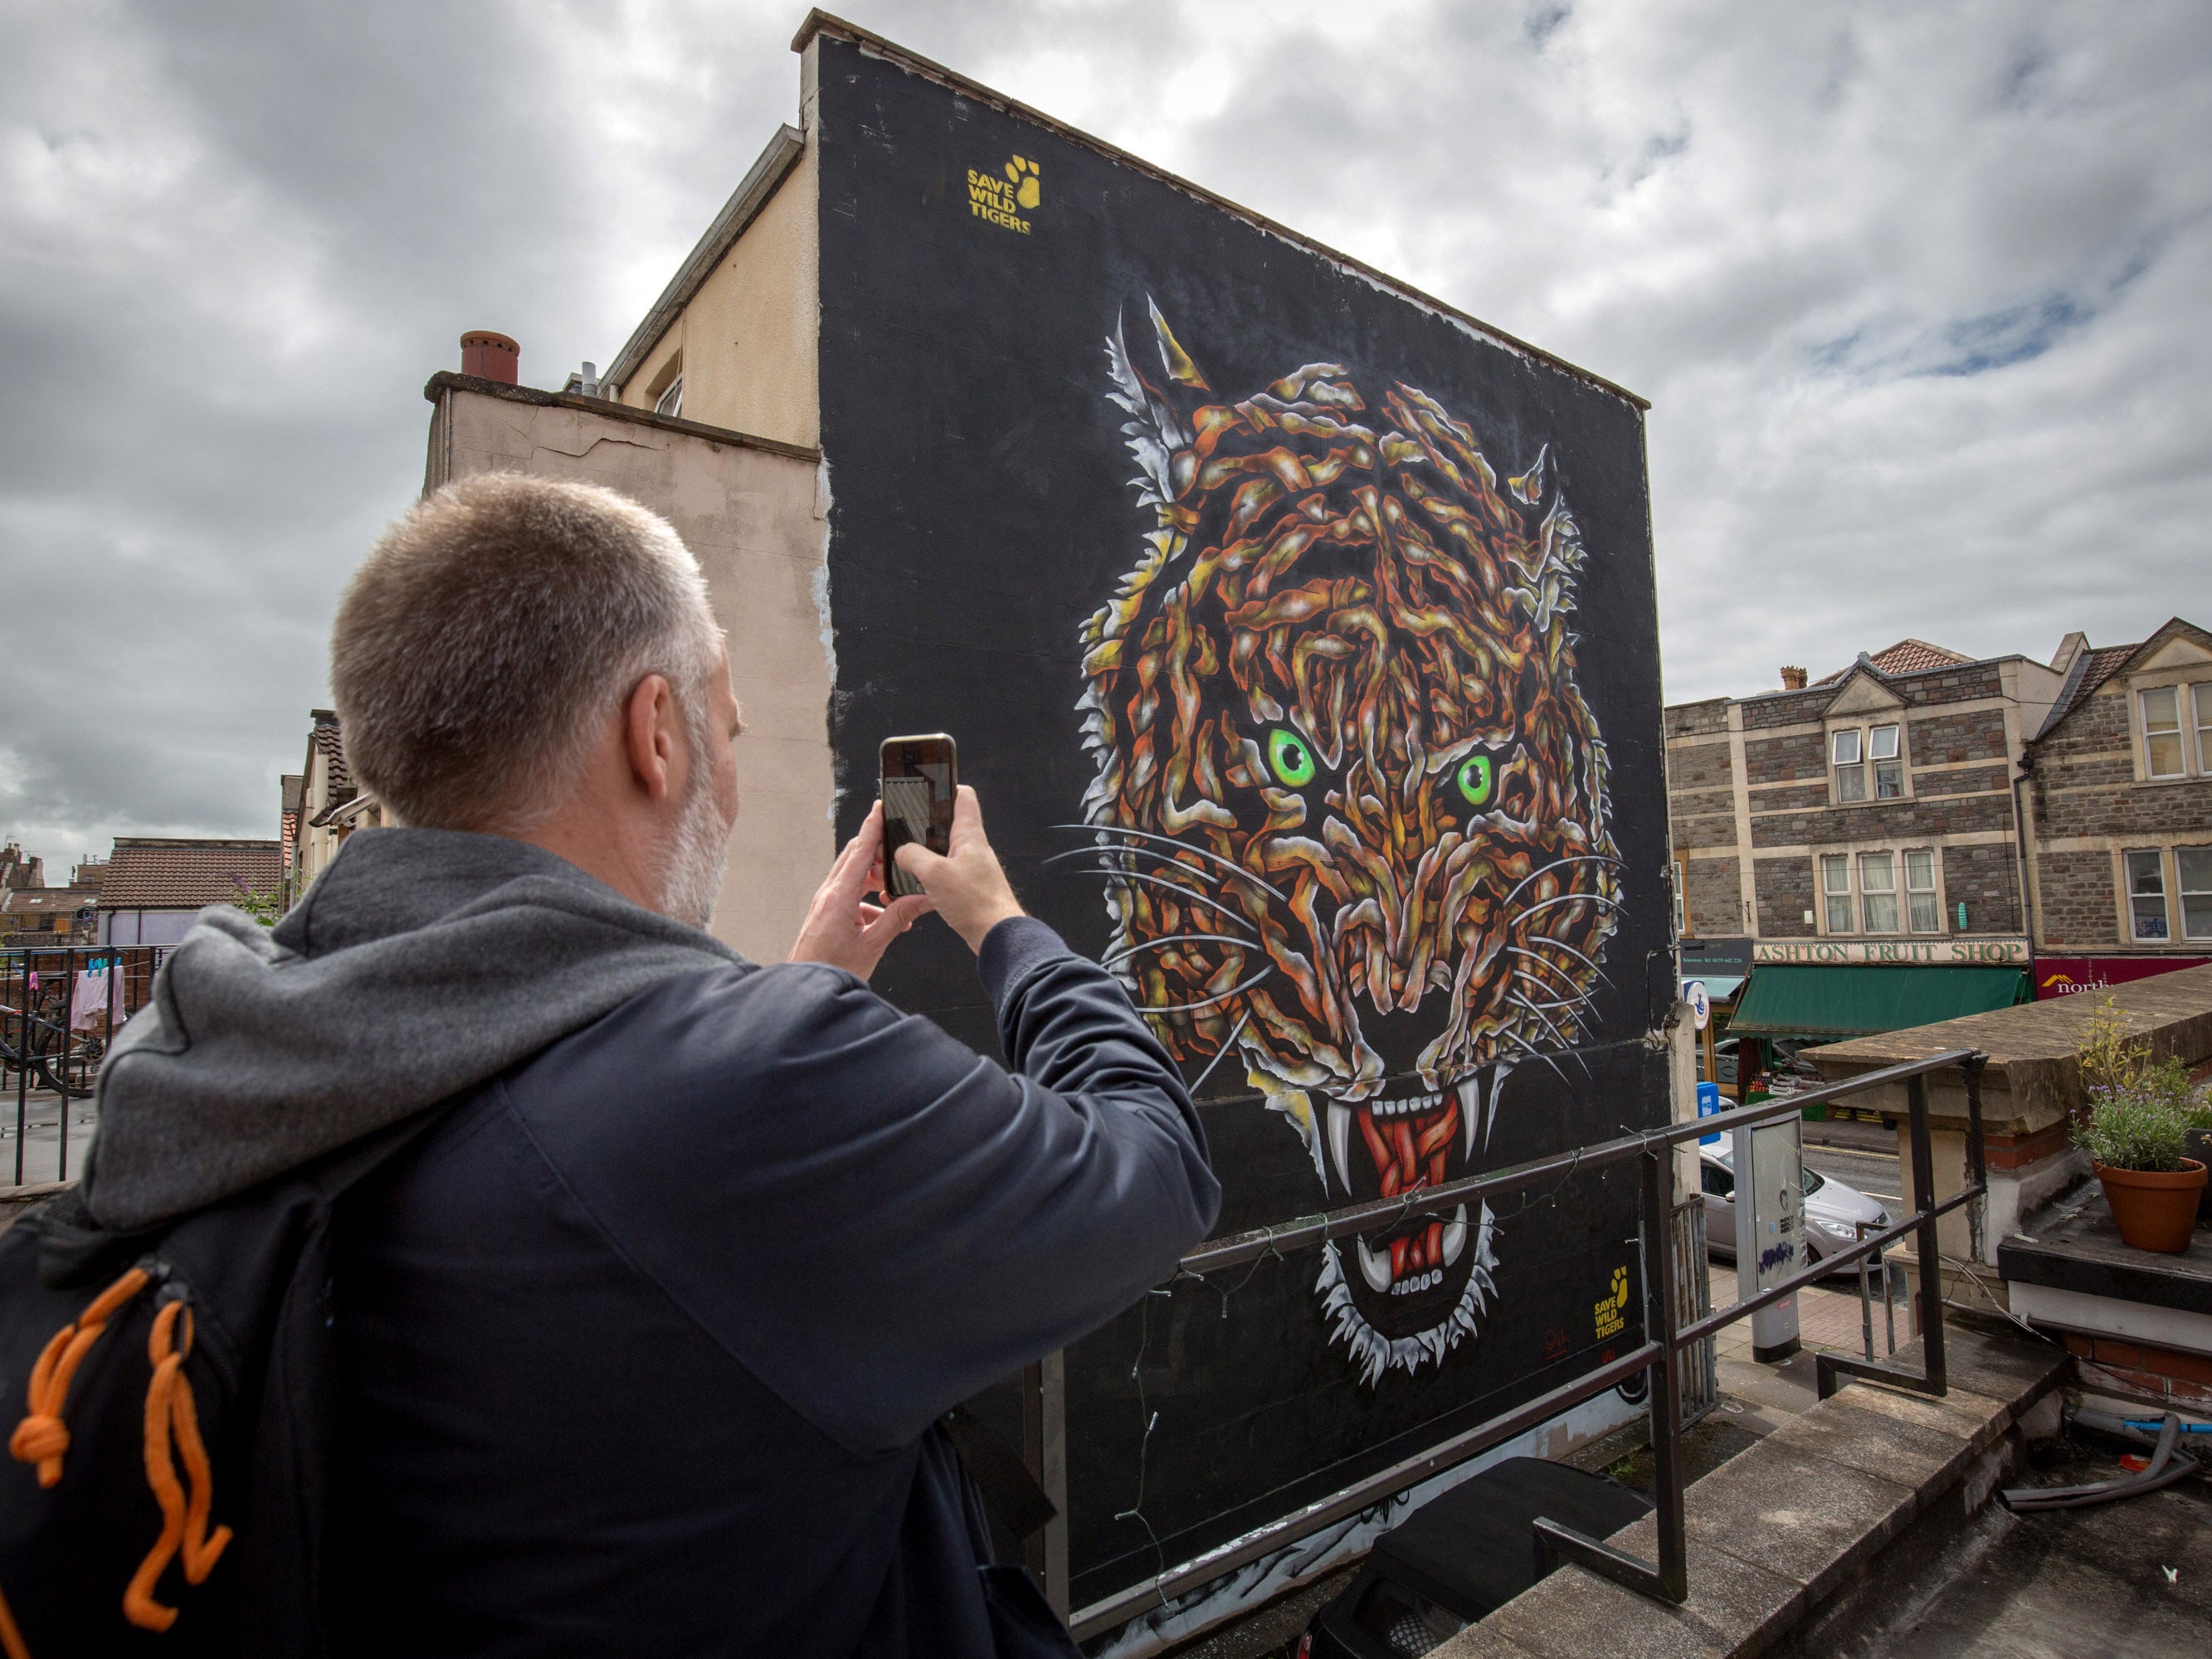 Man takes photograph of large animal mural on Bedminster high street